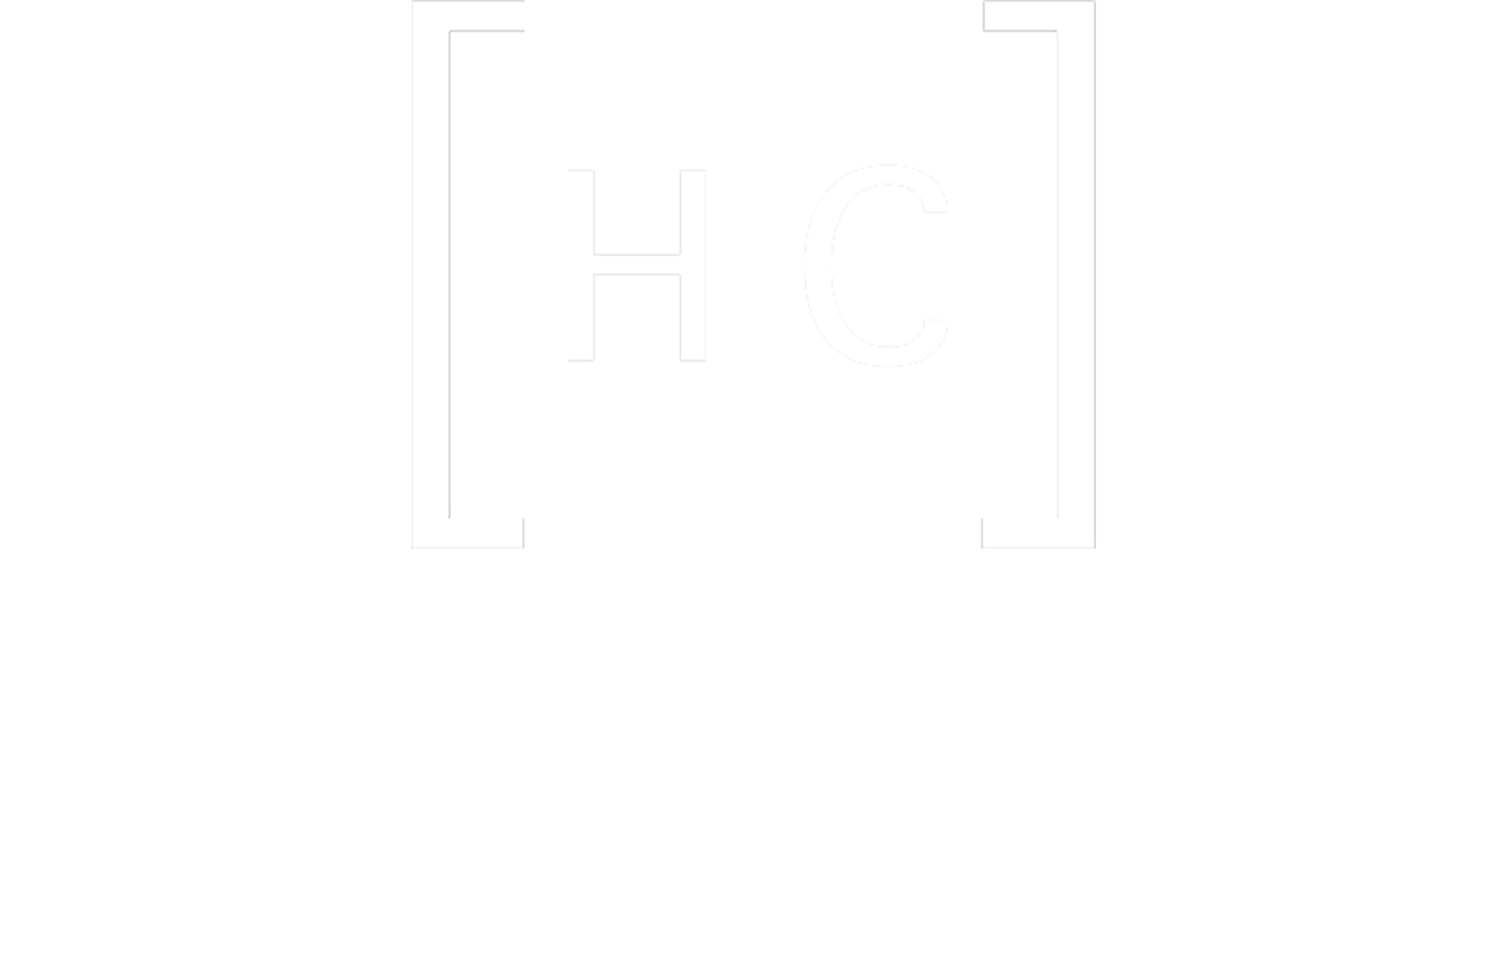 Harbour City Imagery